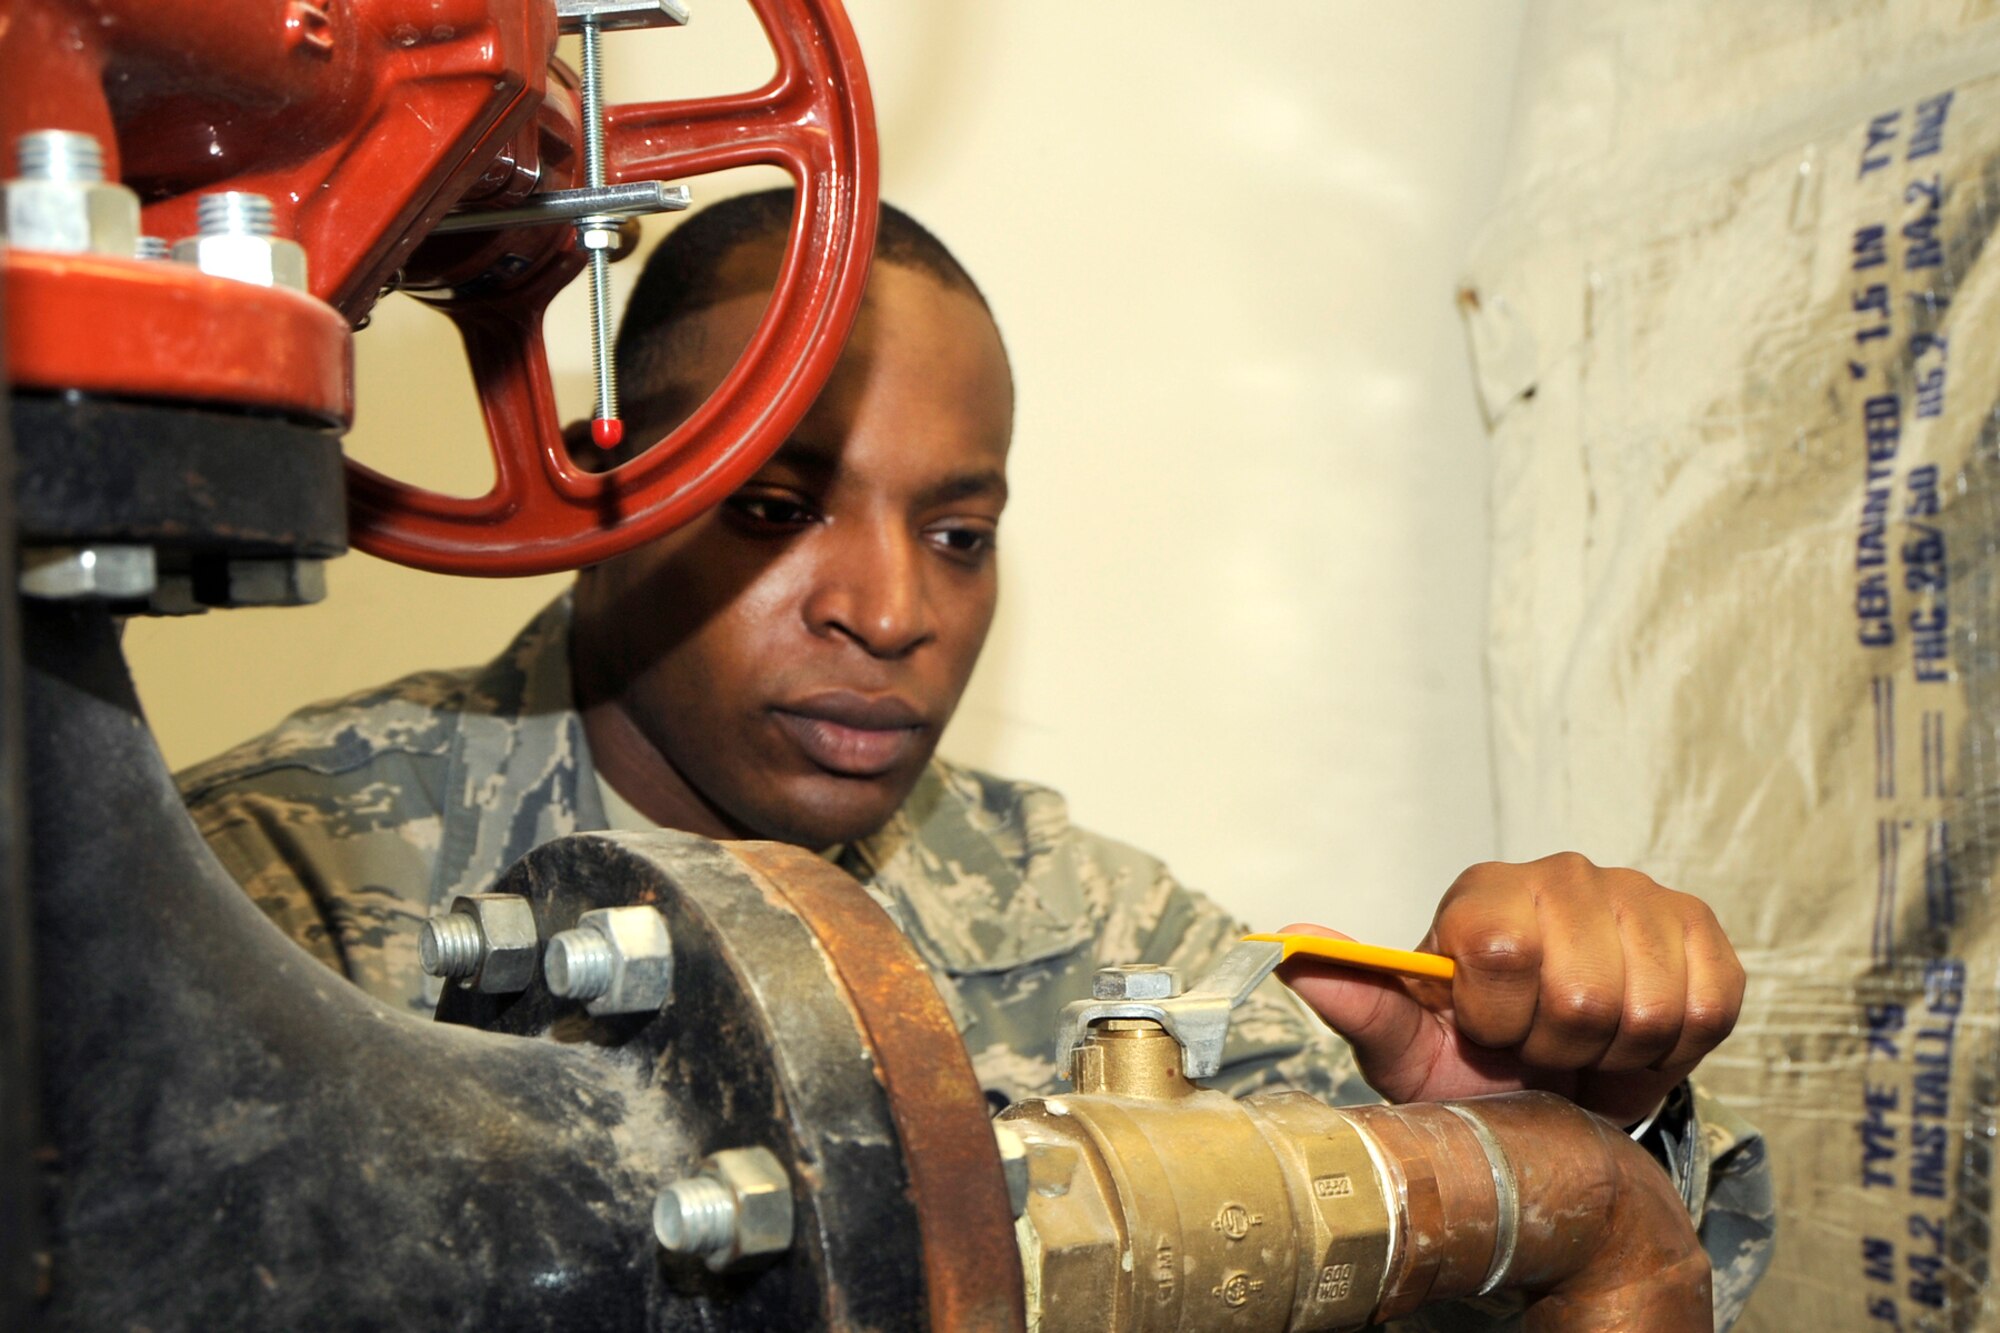 SSgt. Henry McCall, a Water & Fuels System Maintenance specialist with the 127th Civil Engineer Squadron, adjusts a valve on a water supply line. McCall is a member of the Michigan Air National Guard at Selfridge Air National Guard Base, Mich. (U.S. Air Force photo by John S. Swanson)